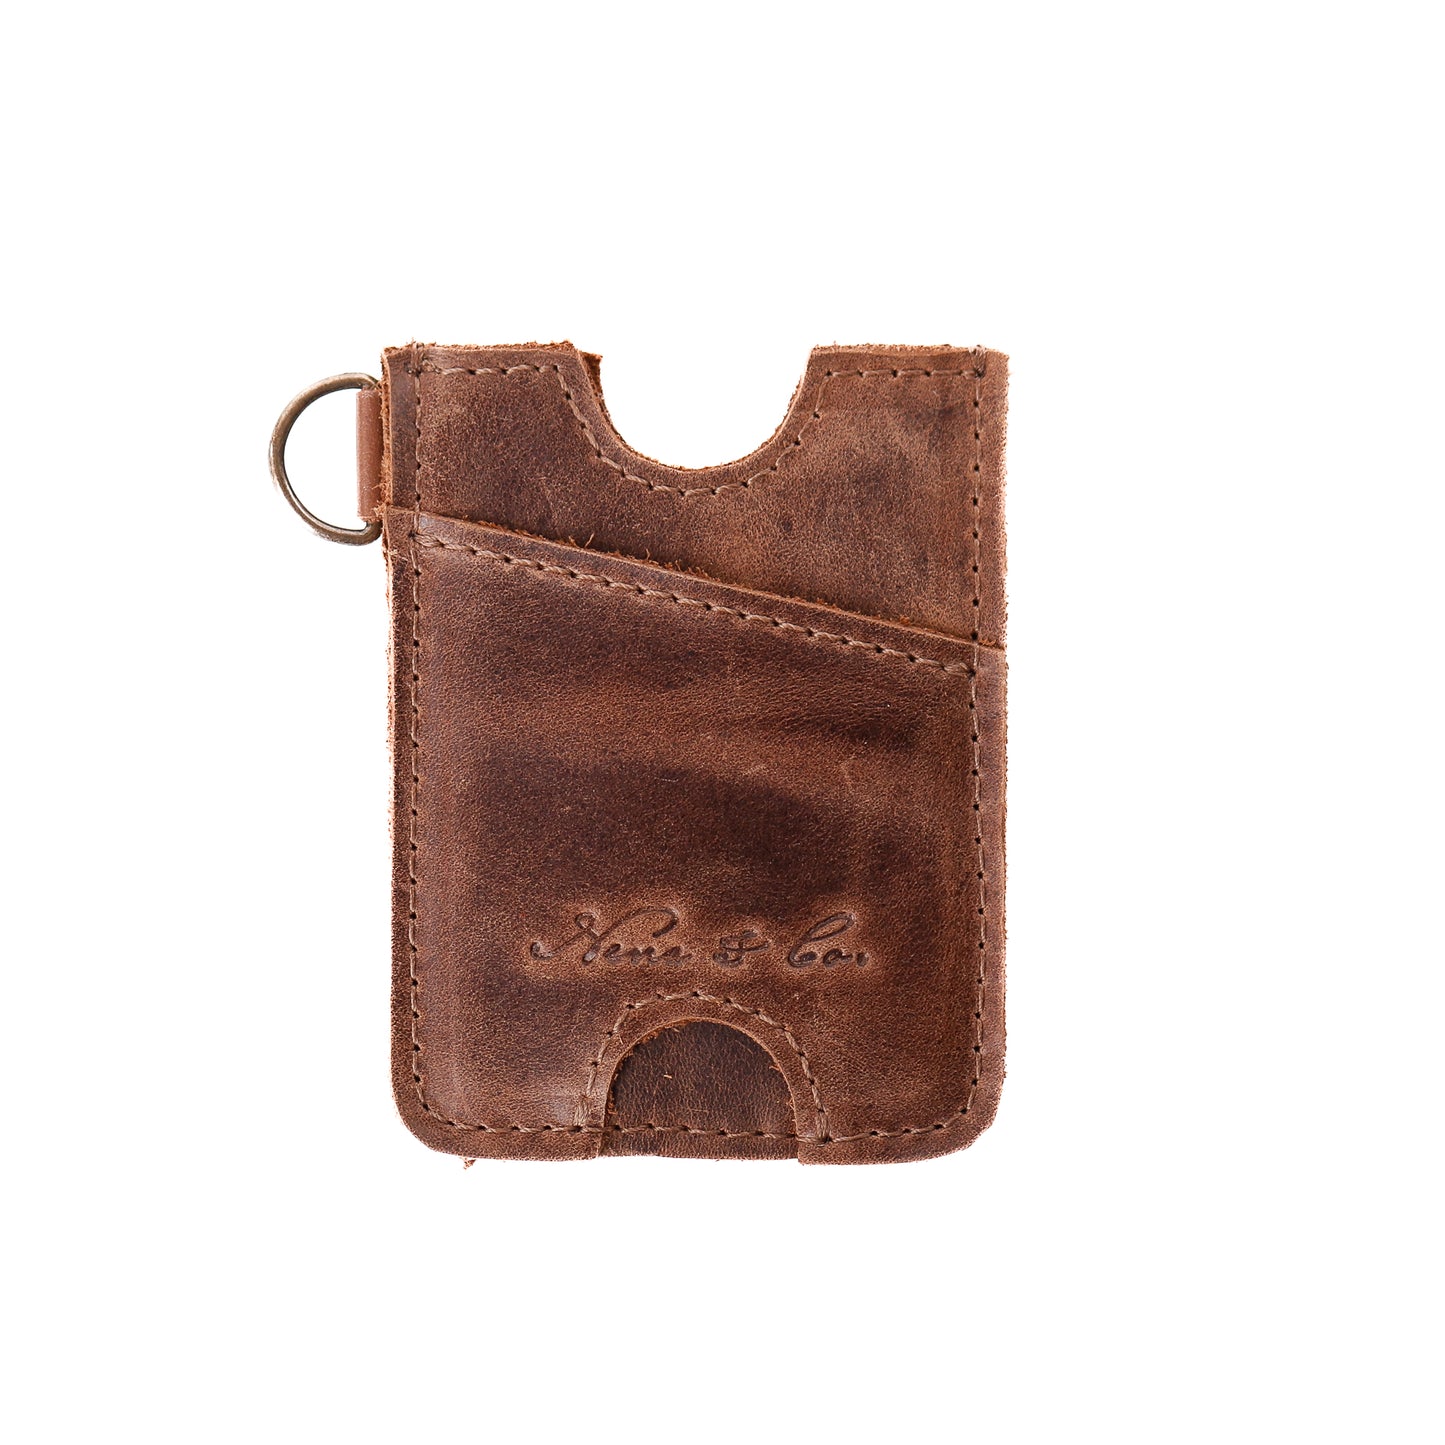 SLIM CARD WALLET - FULL LEATHER - CAOBA